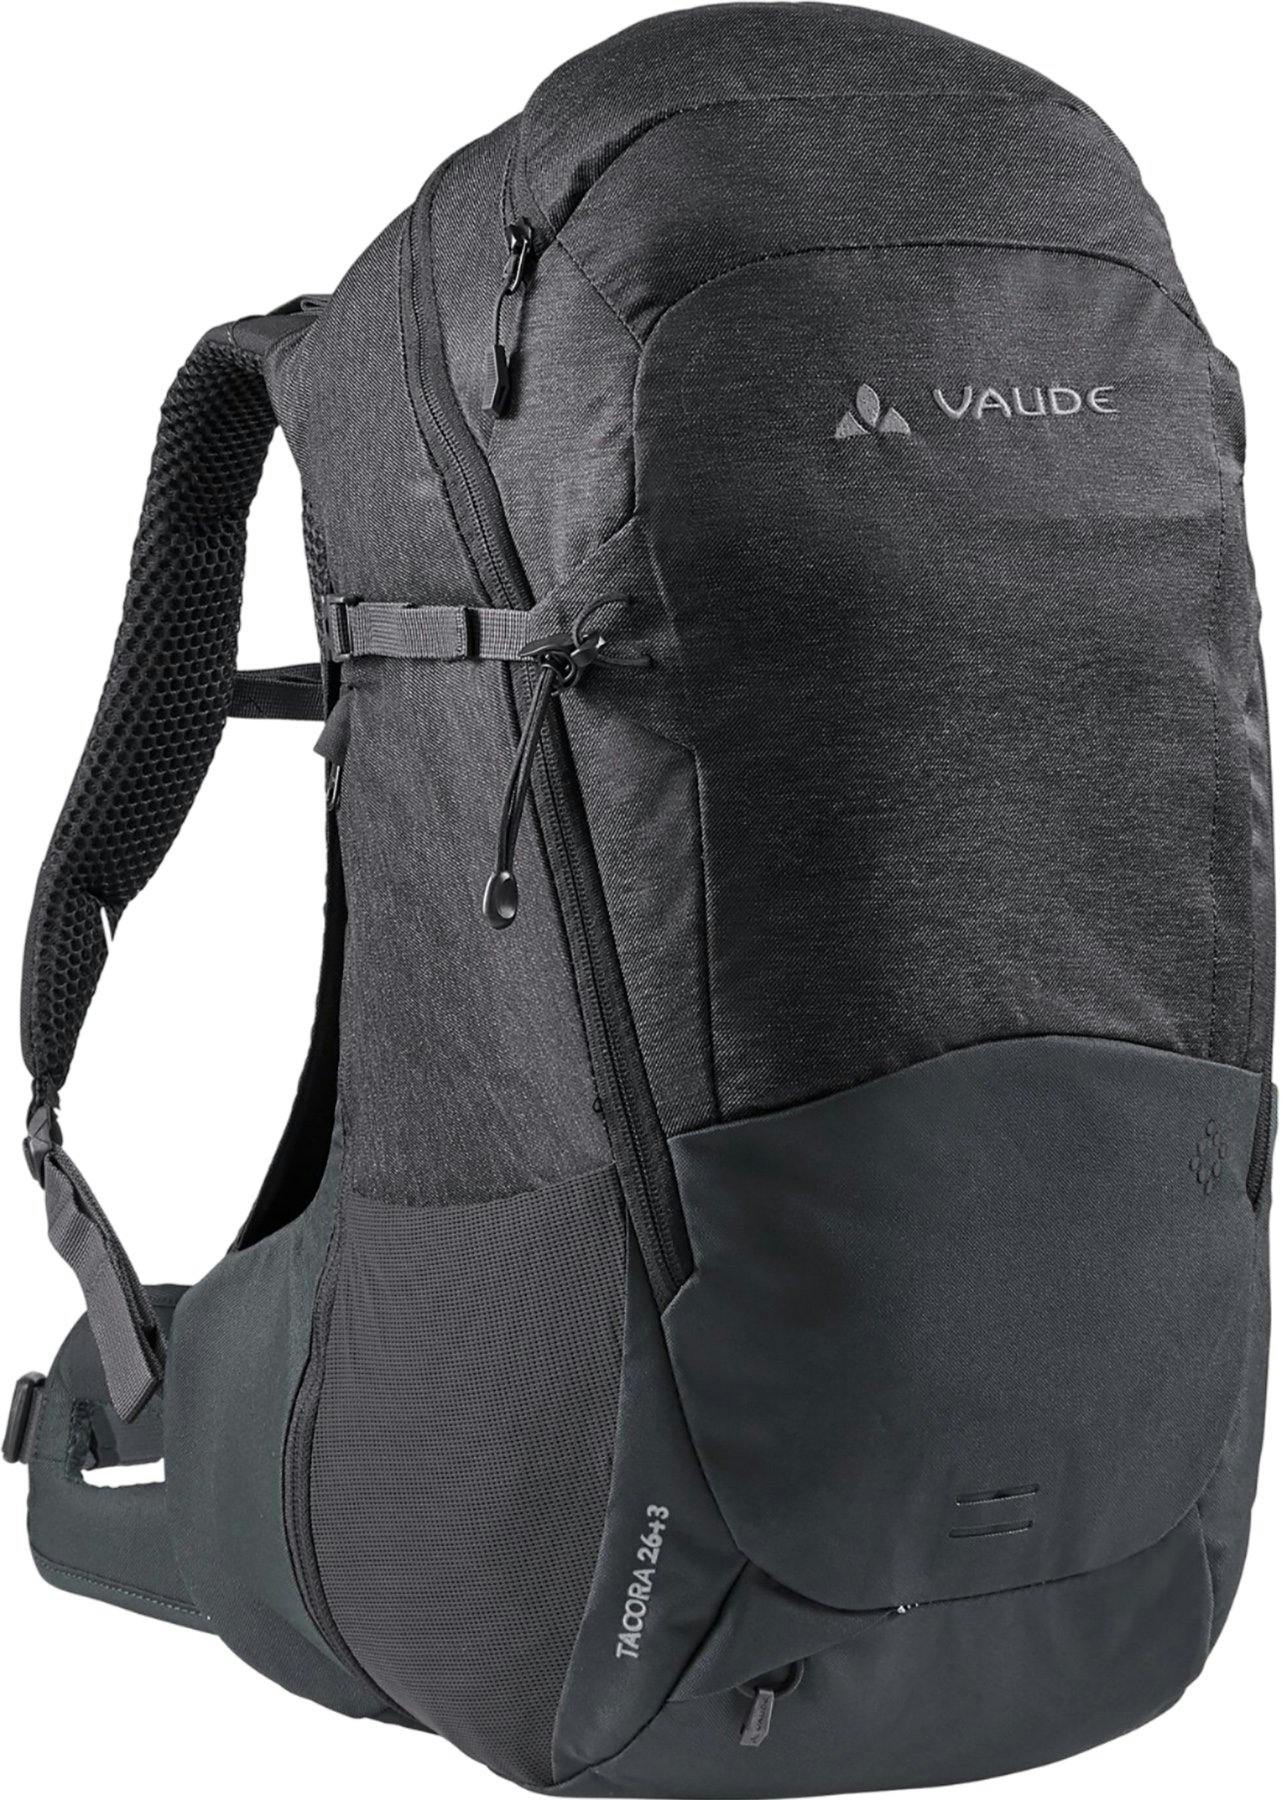 Product image for Tacora Hiking Backpack 26+3L - Women's